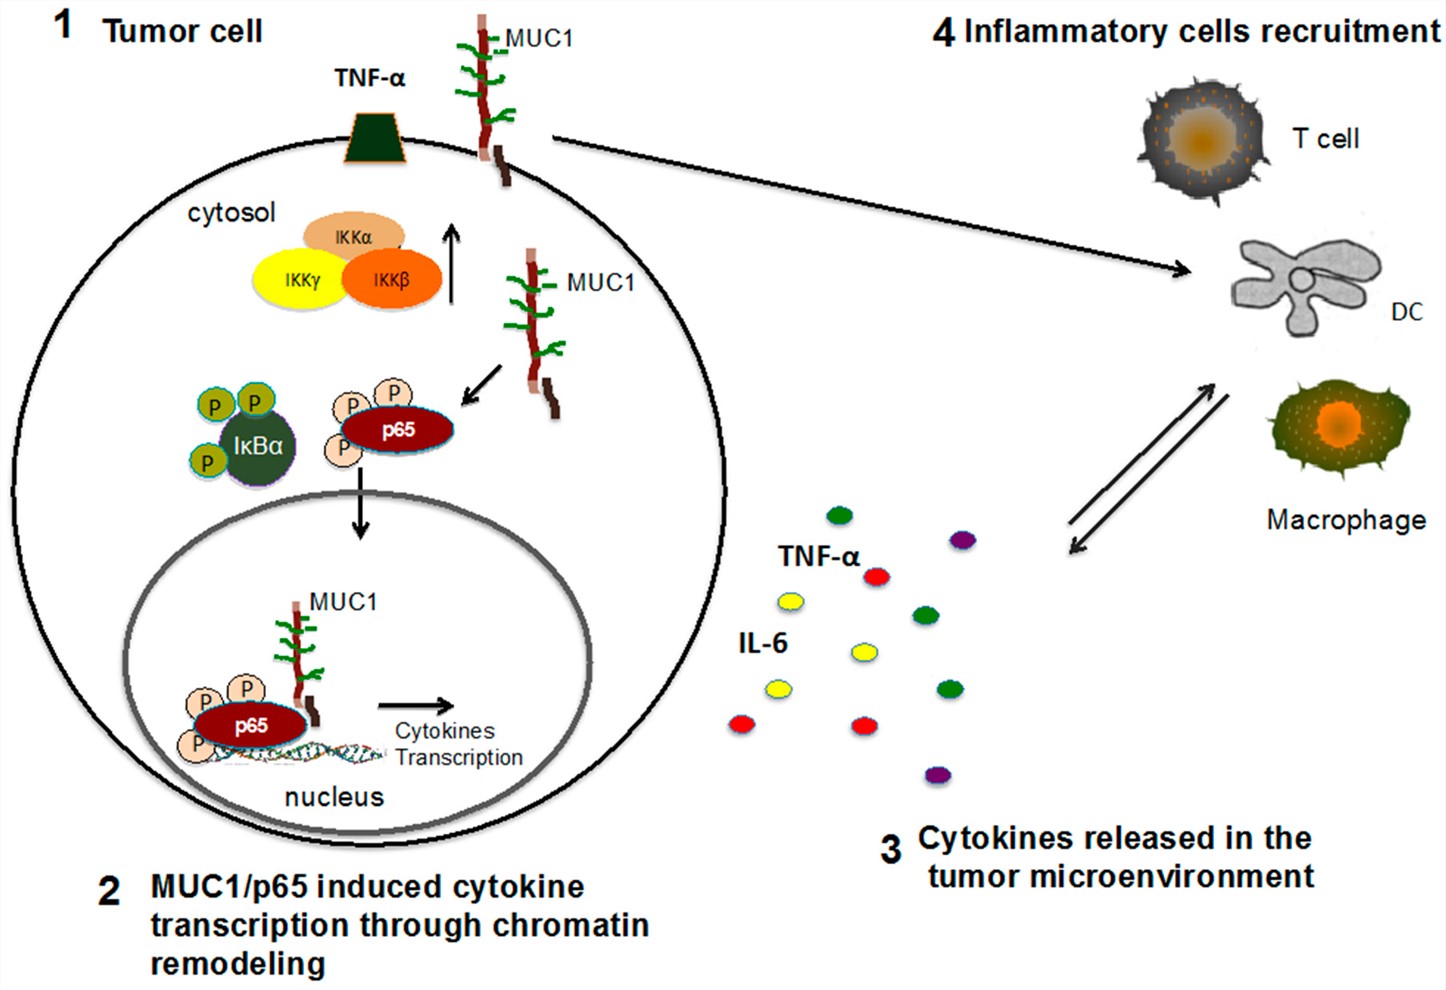 Model of MUC1 role in the tumor microenvironment. (Cascio and Finn, 2016)